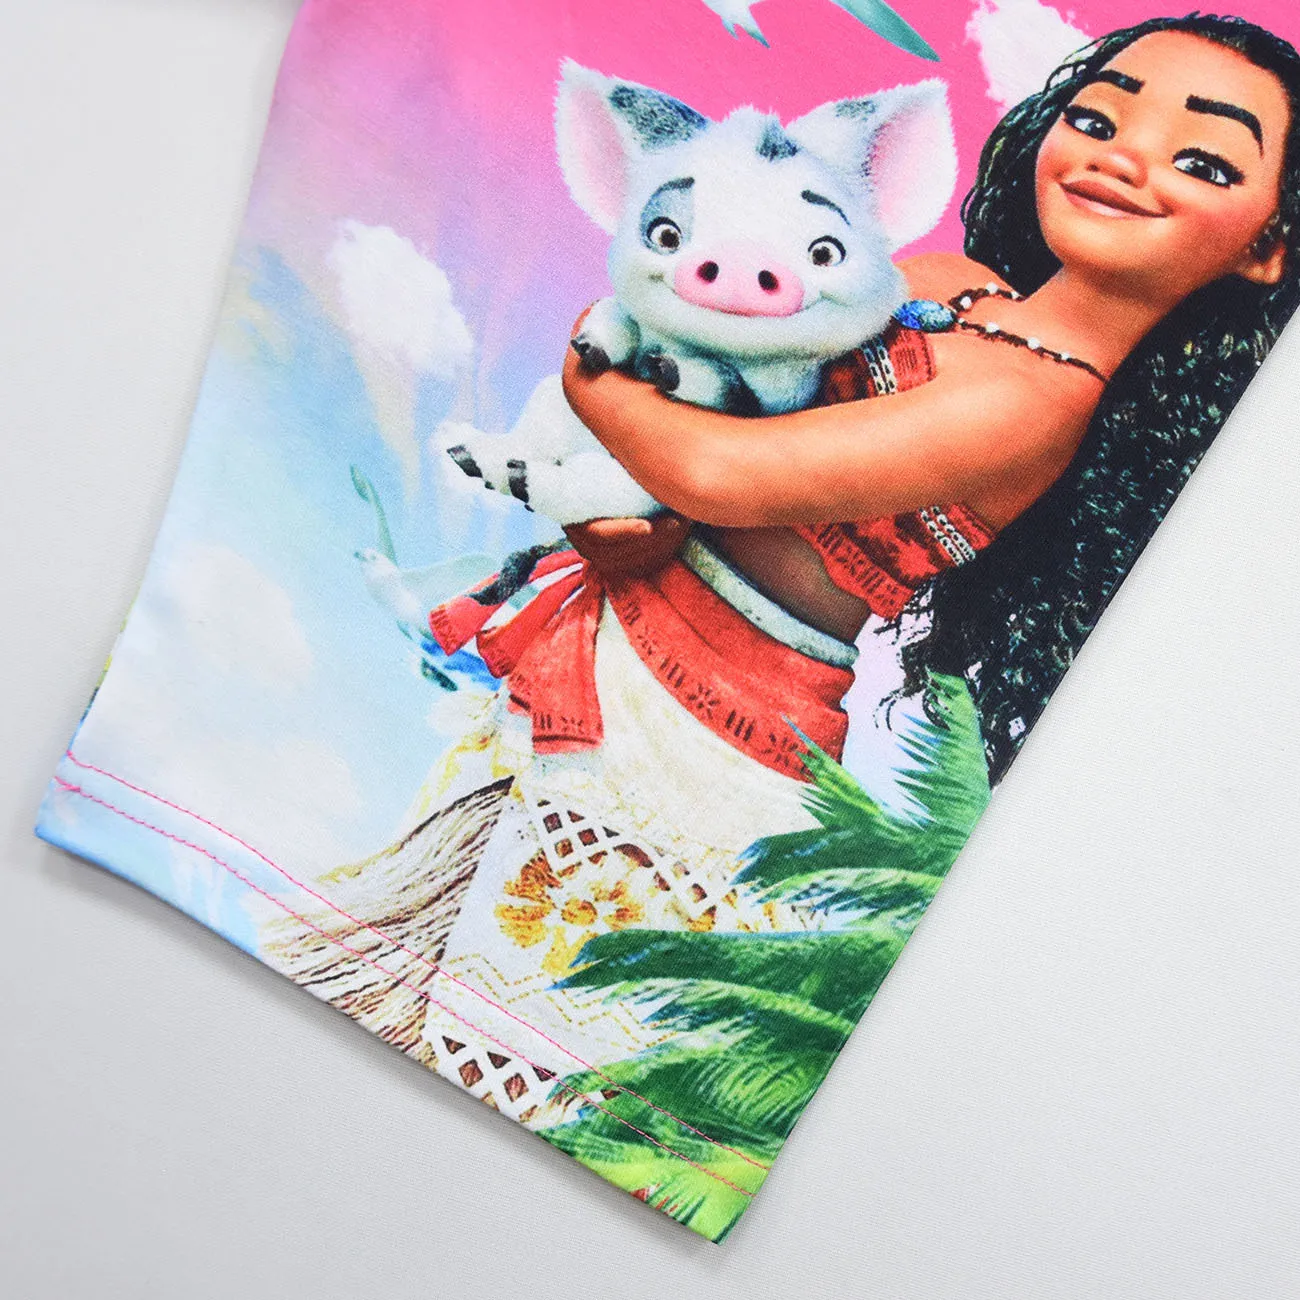 kids moana pajamas for girls summer short sleeve vaiana costume children party clothing with pet pig casual loose clothes sets free global shipping